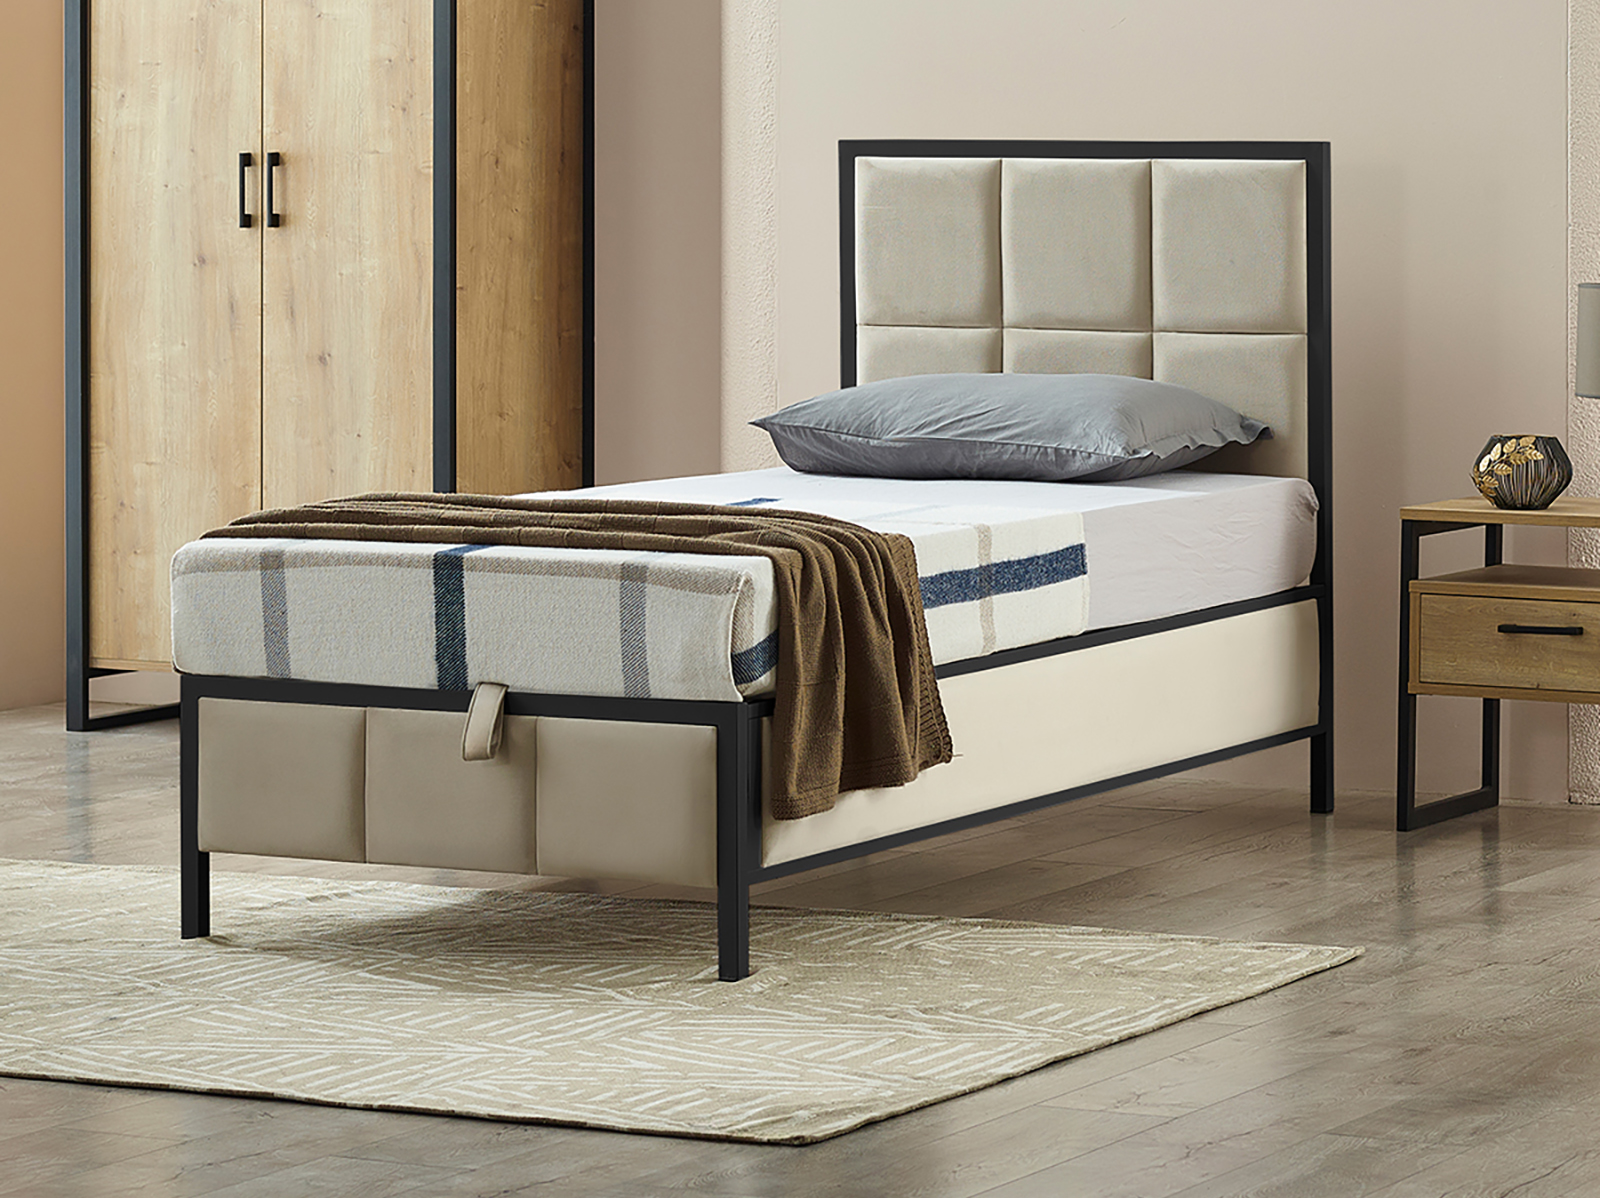 Gleam Single Bed Base with Upholstered Headboard